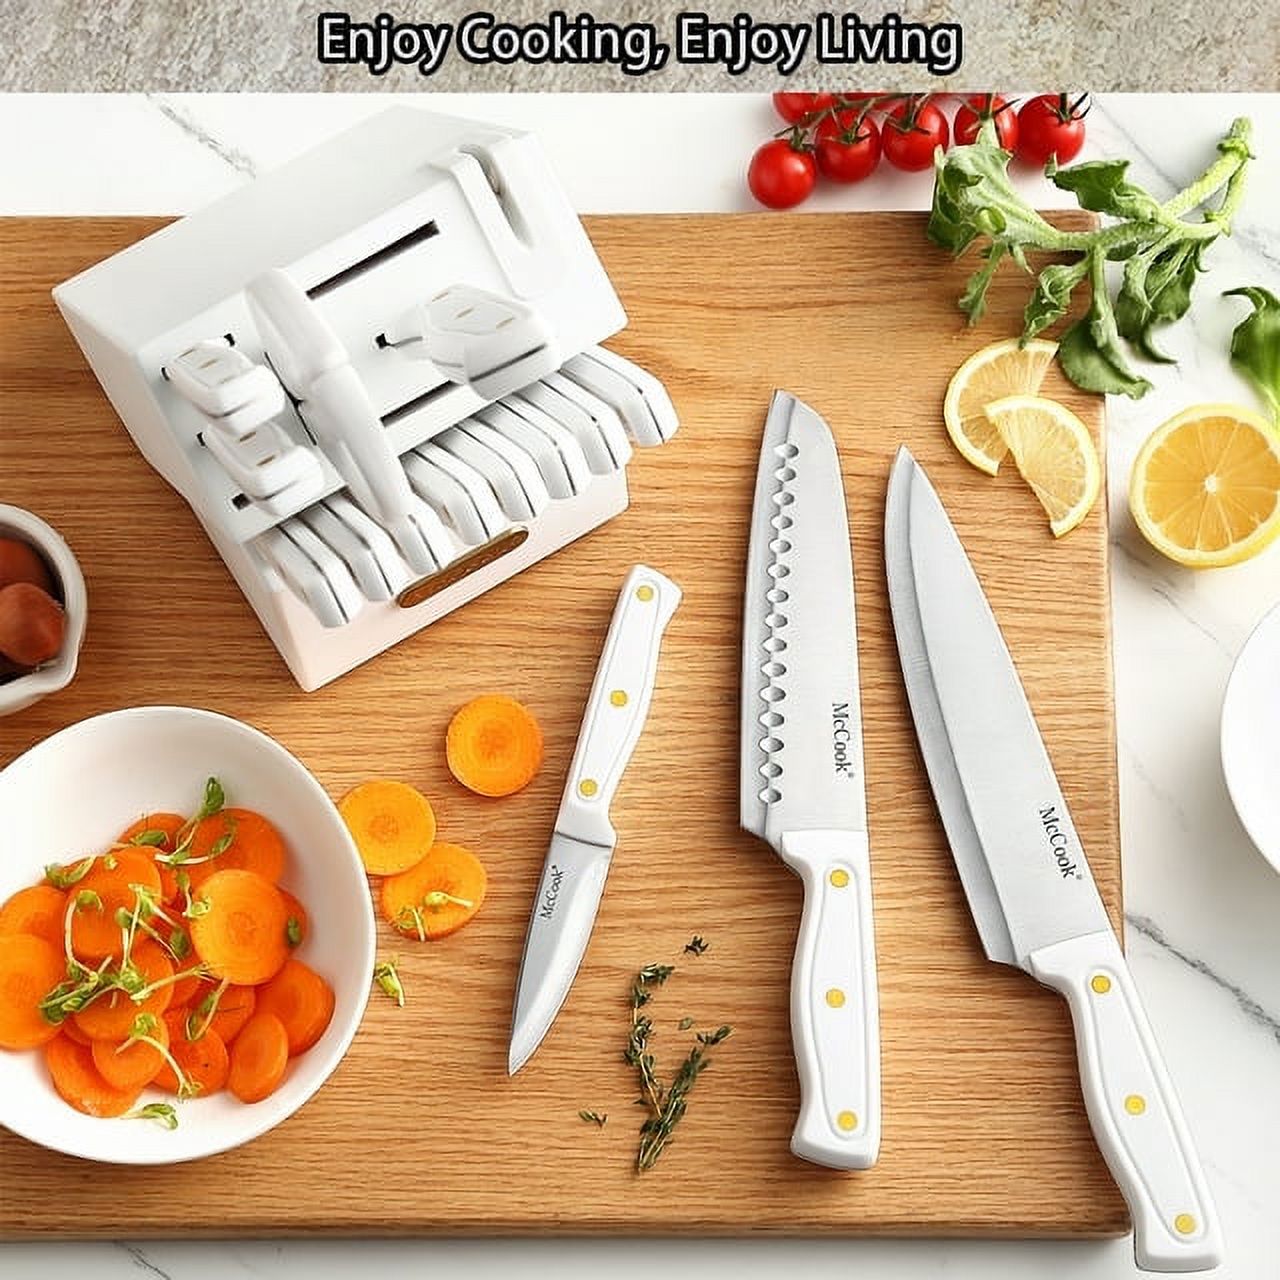 Knife set For Kitchen with Block,McCook MC703 White Kitchen Knife Sets with Built-in Sharpener,Cutlery set with Measuring Cups and Spoons For Cooking,26pcs - image 3 of 6